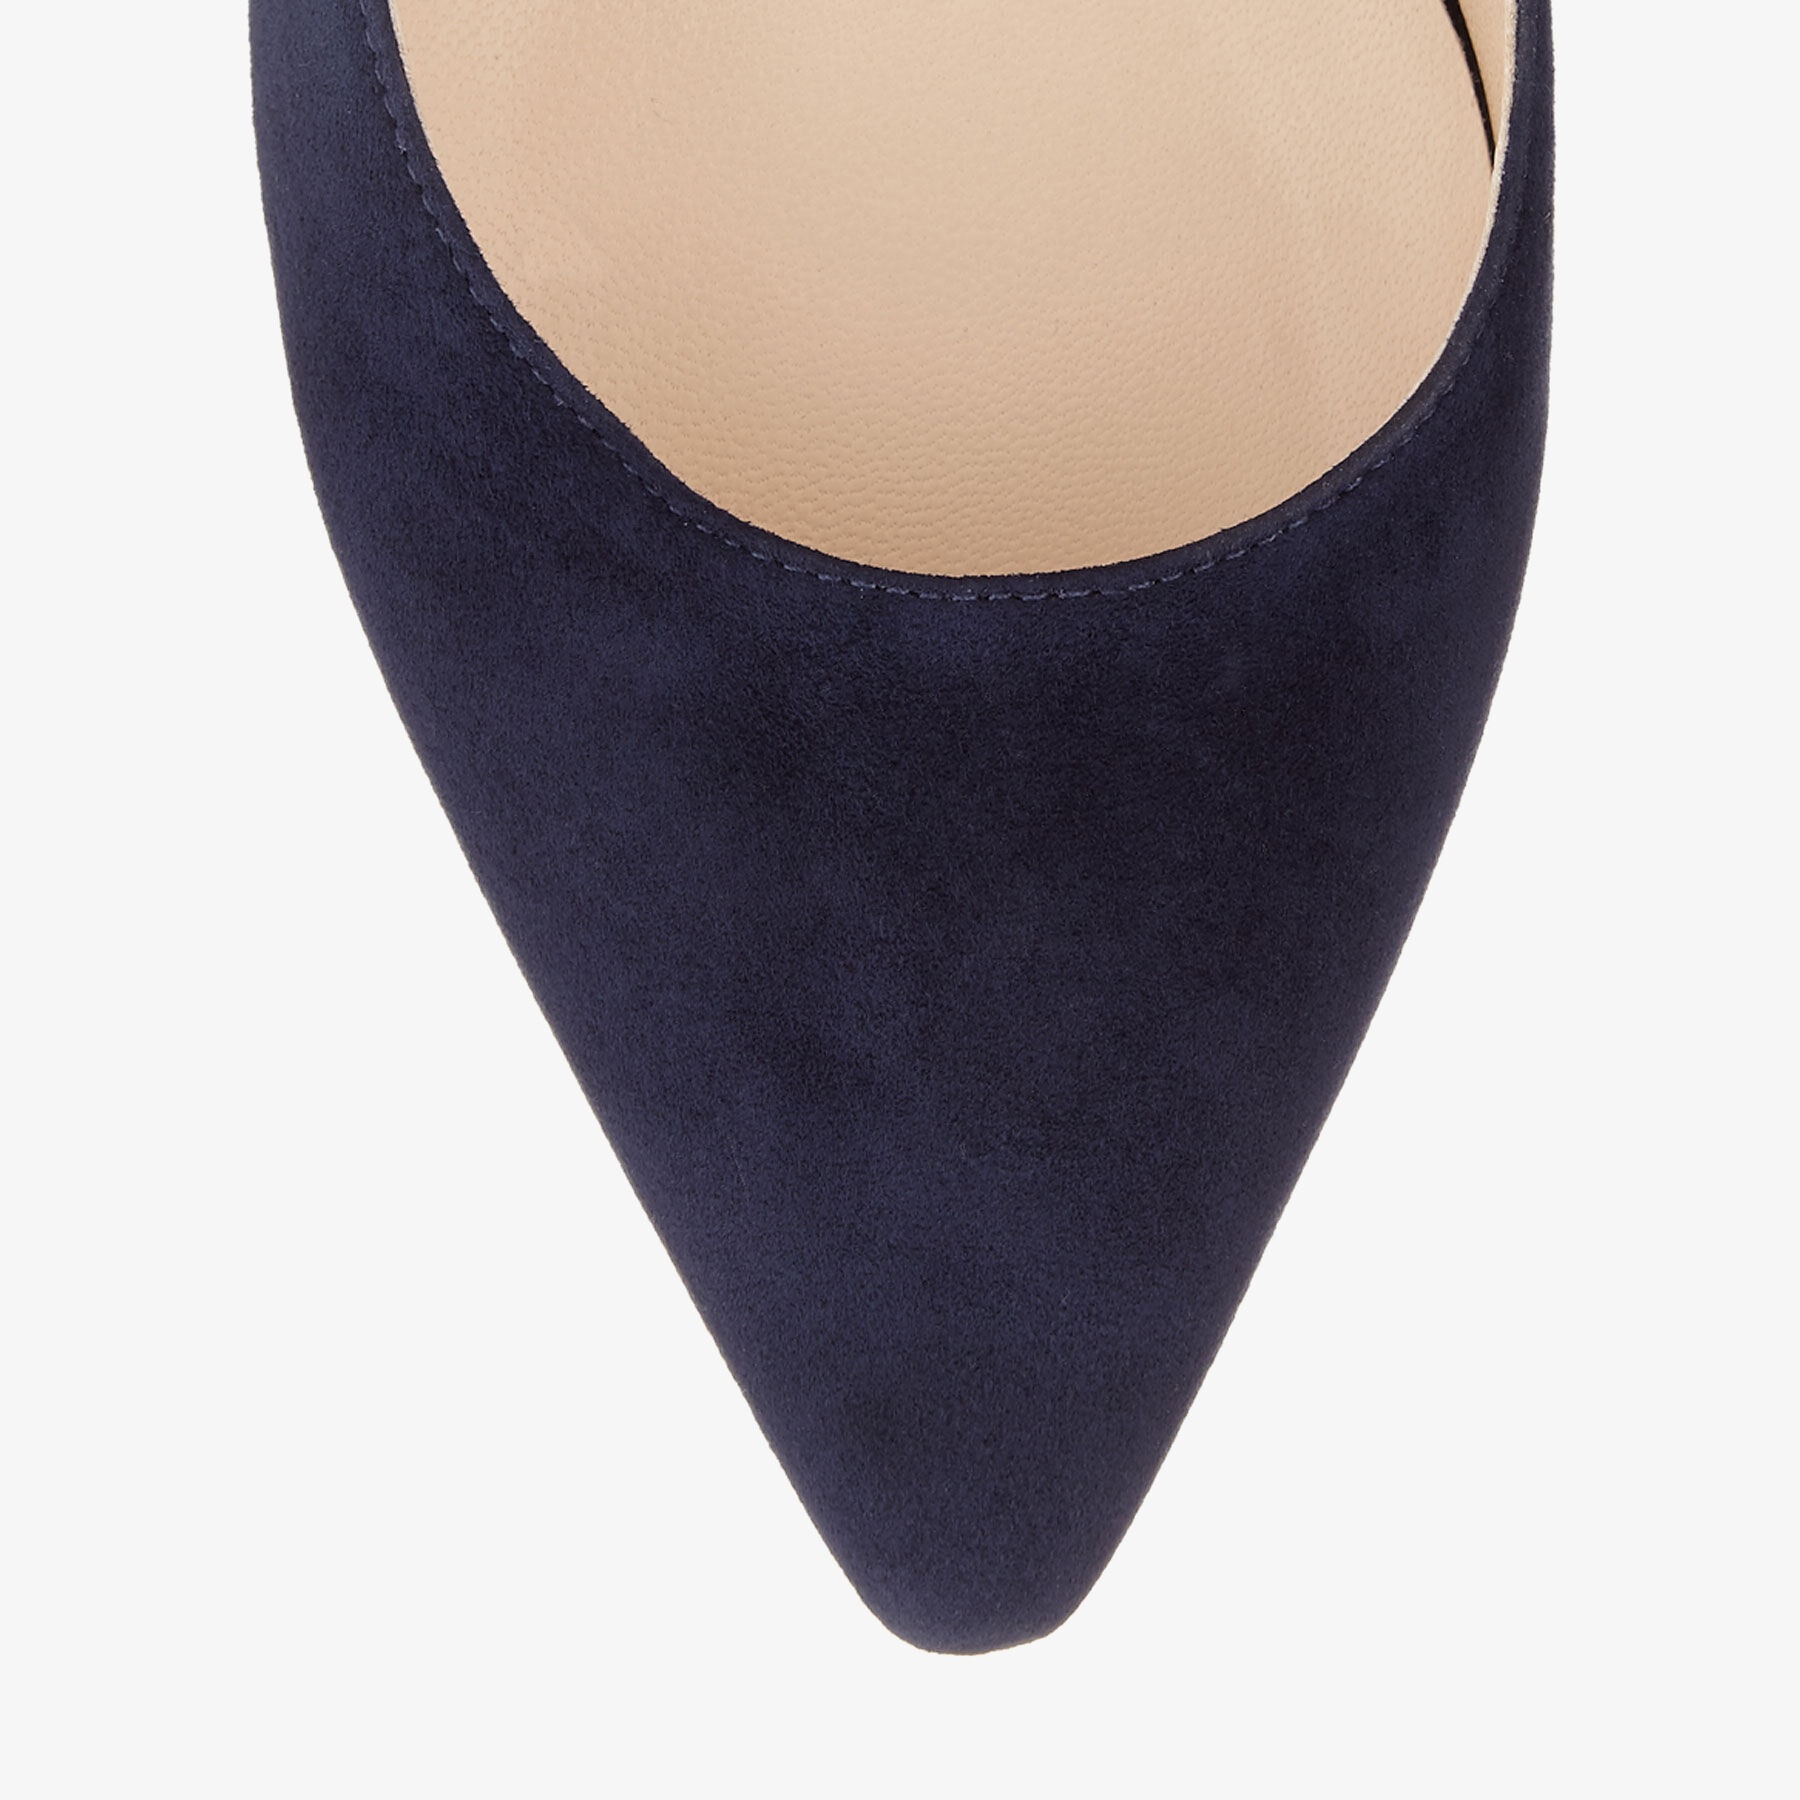 Romy 85
Navy Suede Pointy Toe Pumps - 4